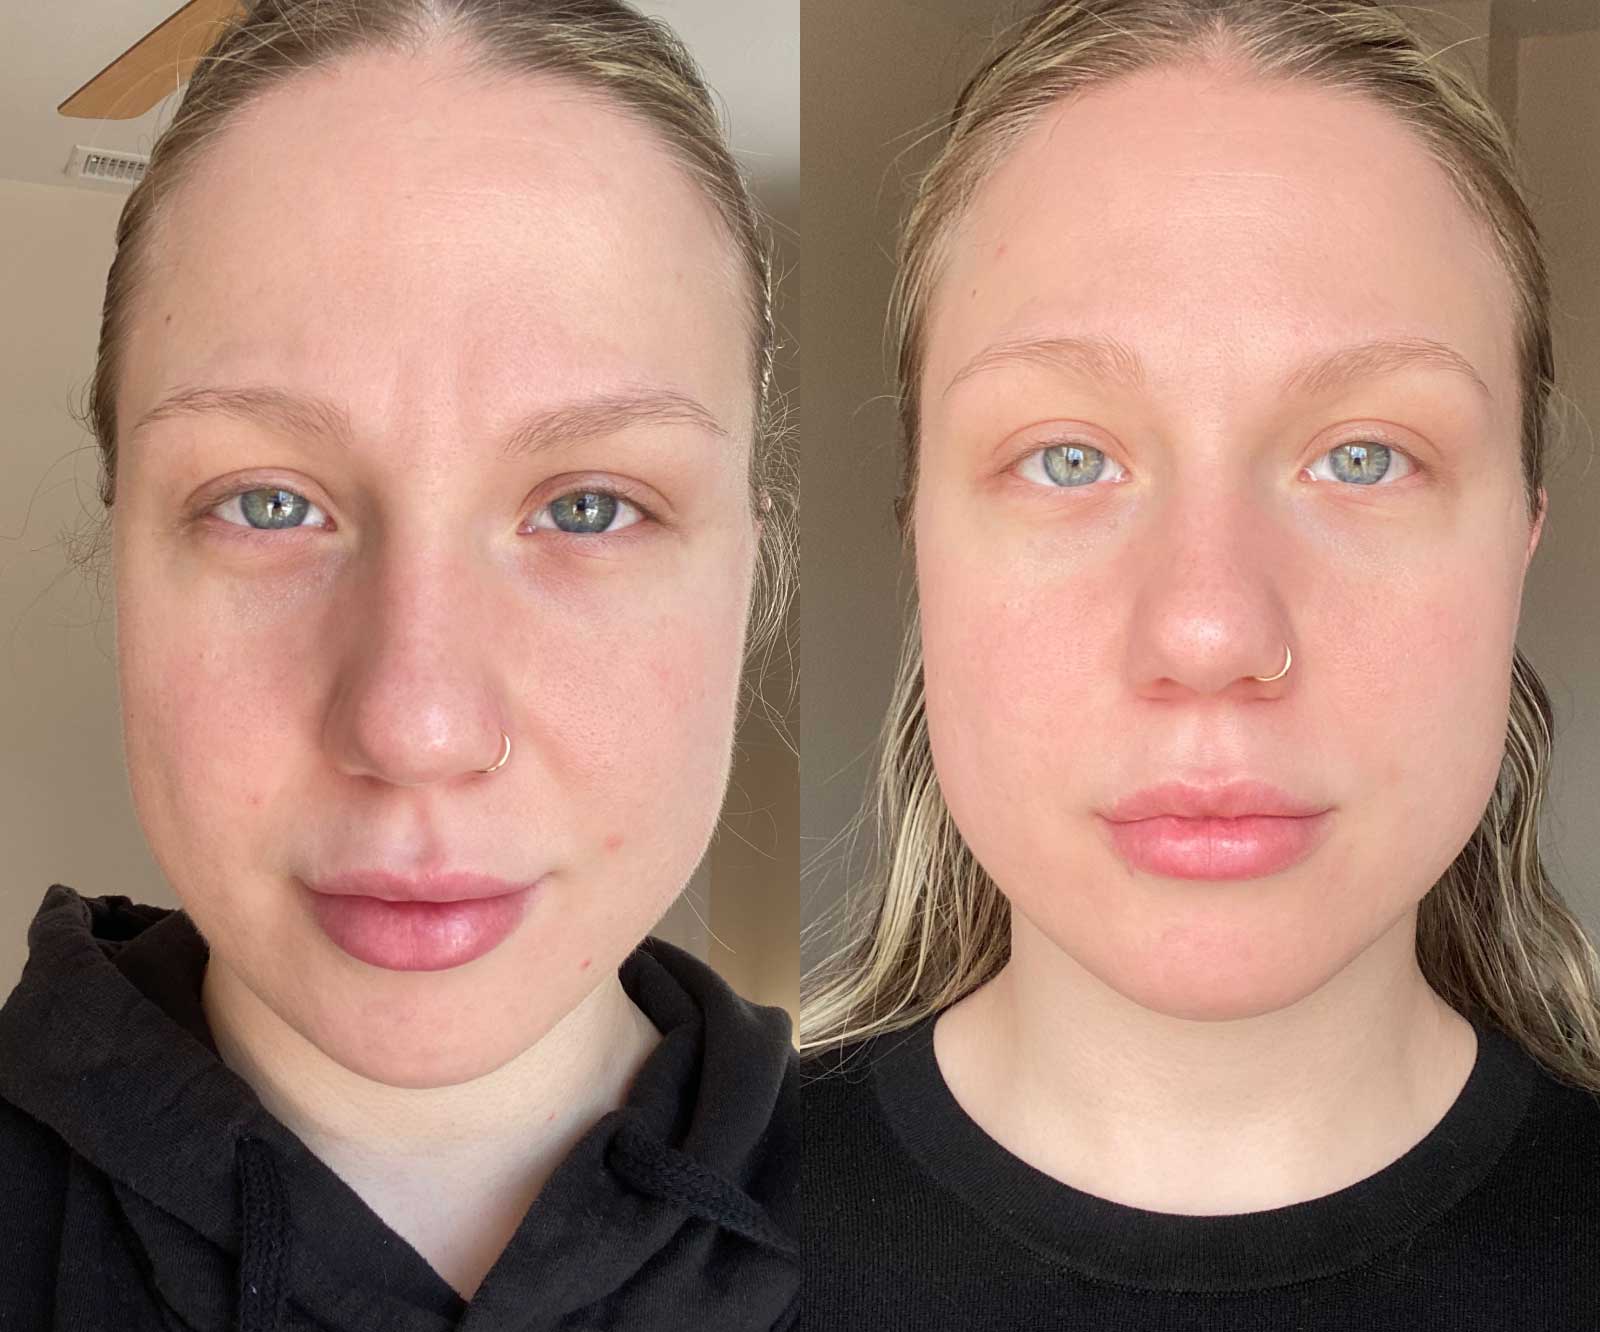 Before and After 14 Days - Skincare Tools - Solawave Wand Red Light Therapy Microcurrent Therapeutic Warmth and Facial Massage